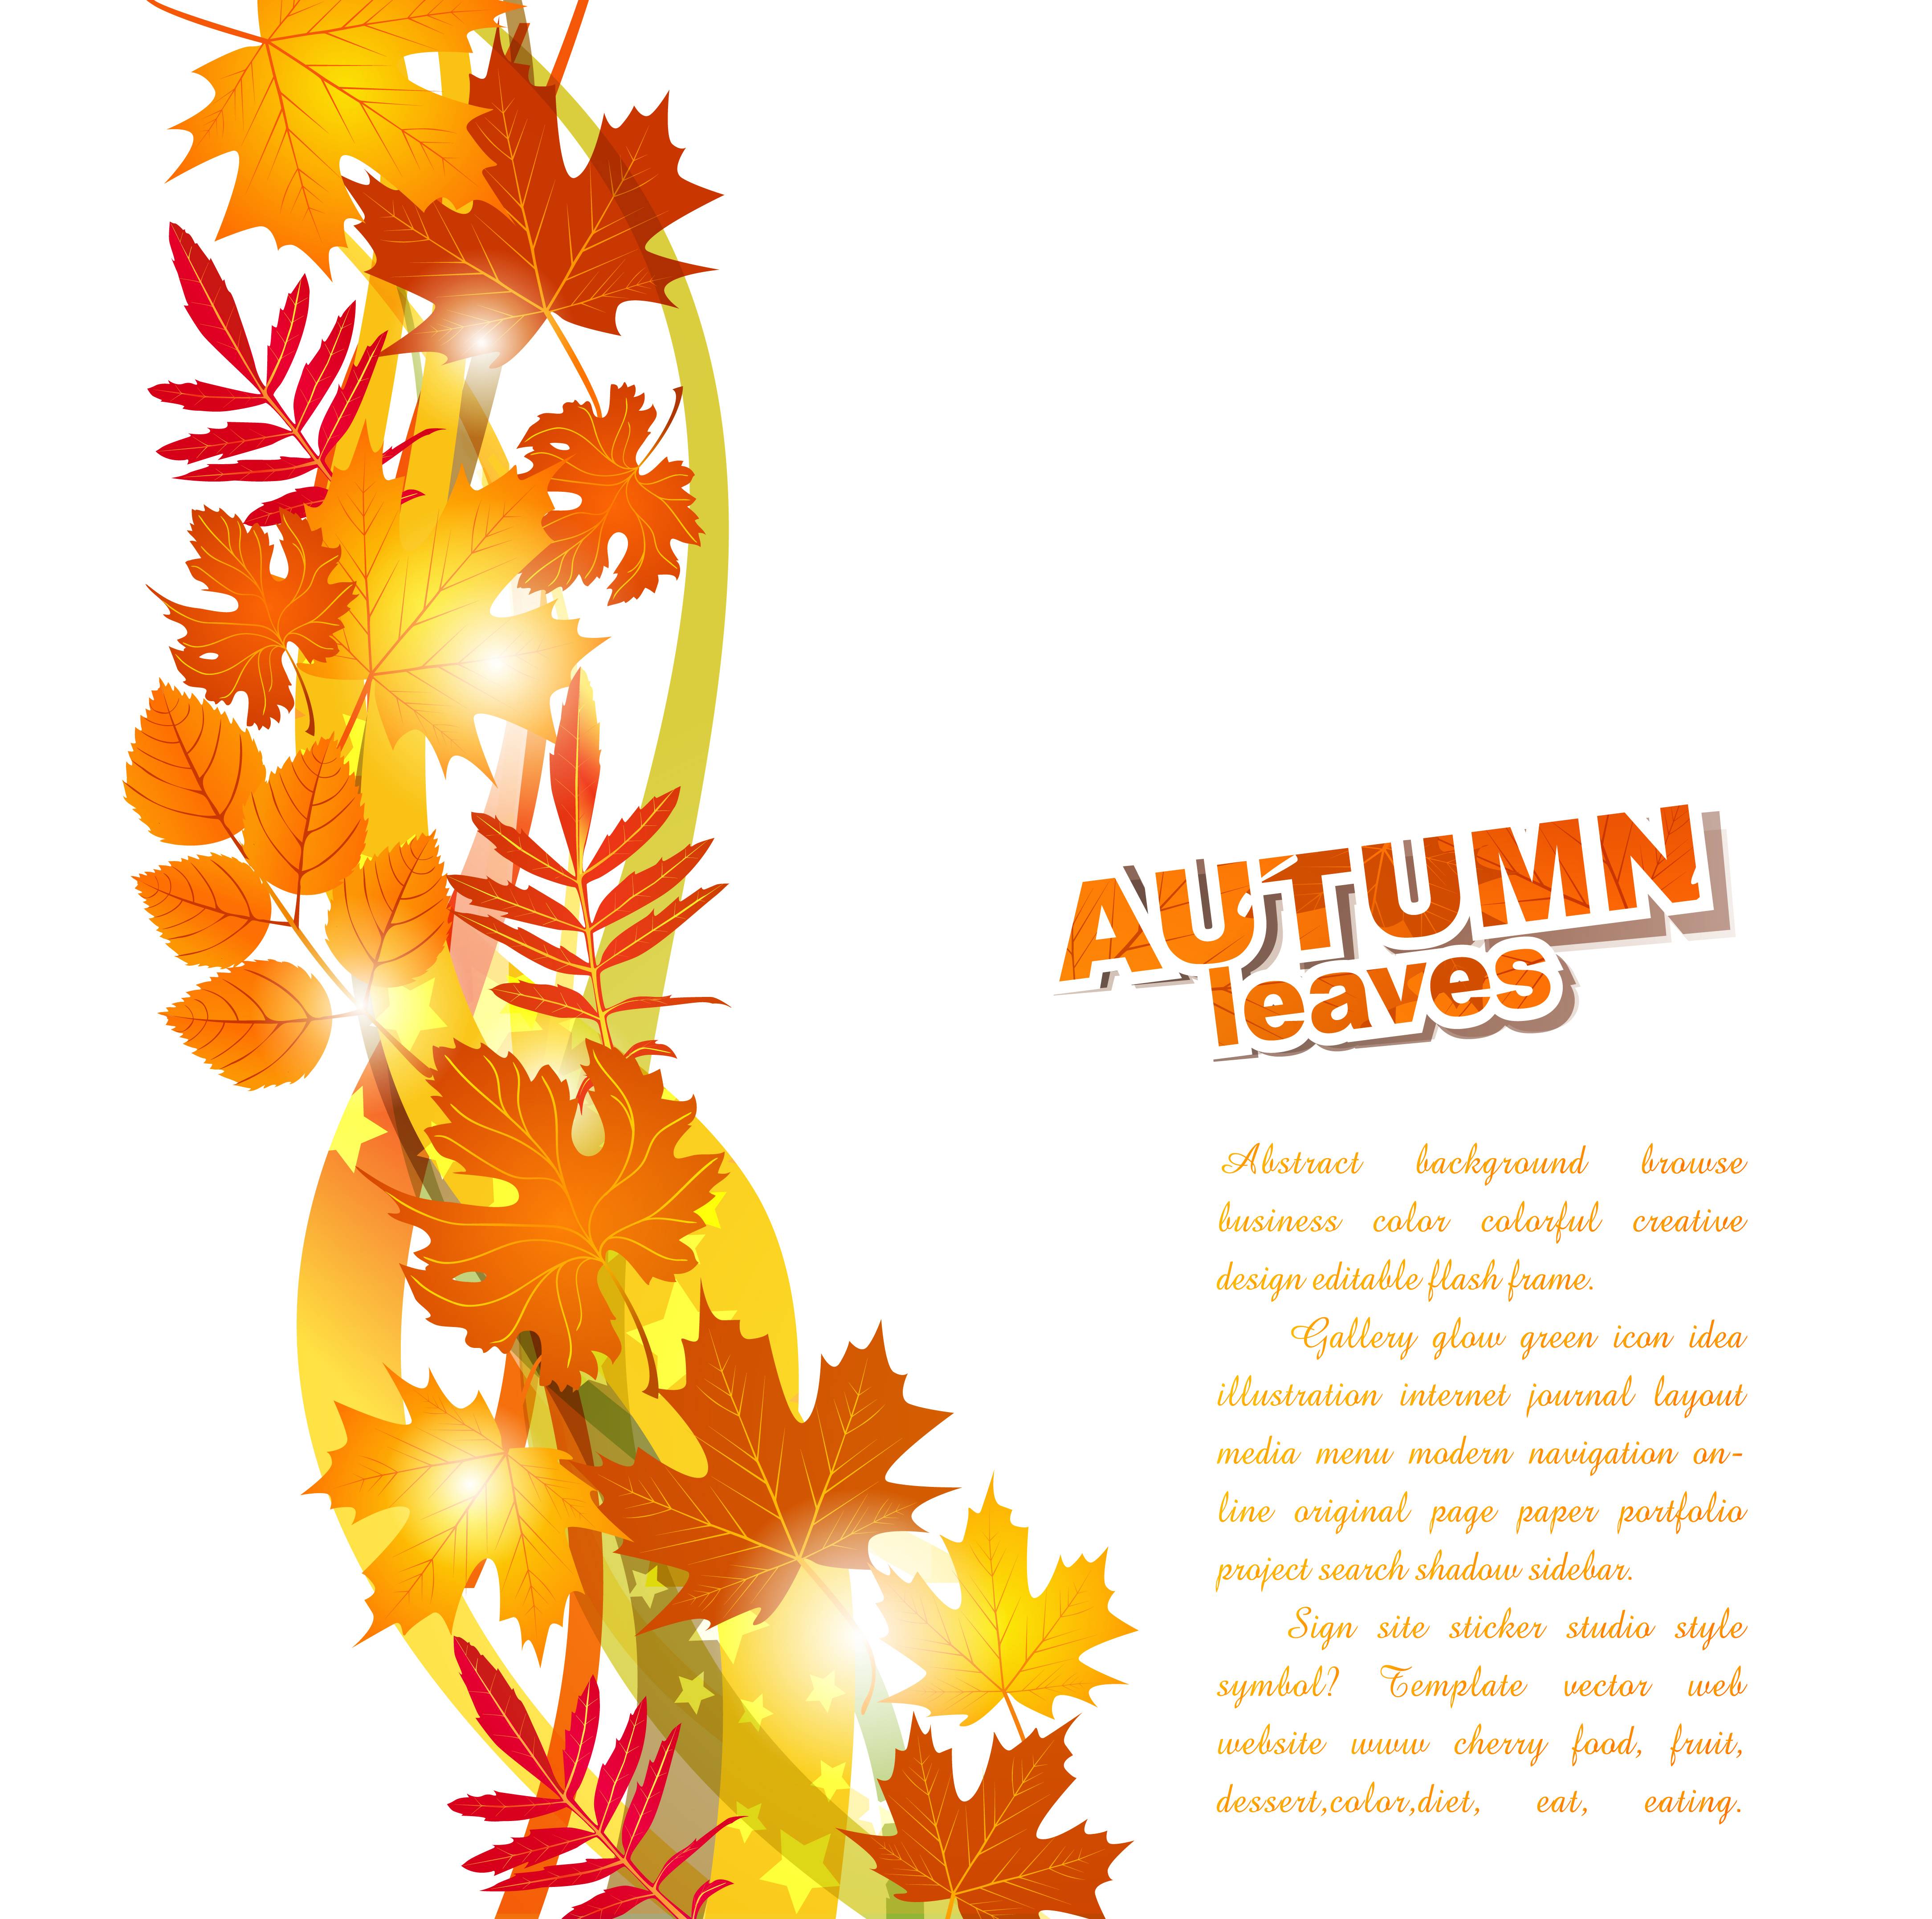 Beautiful autumn leaf background 02 vector Free Vector / 4Vector